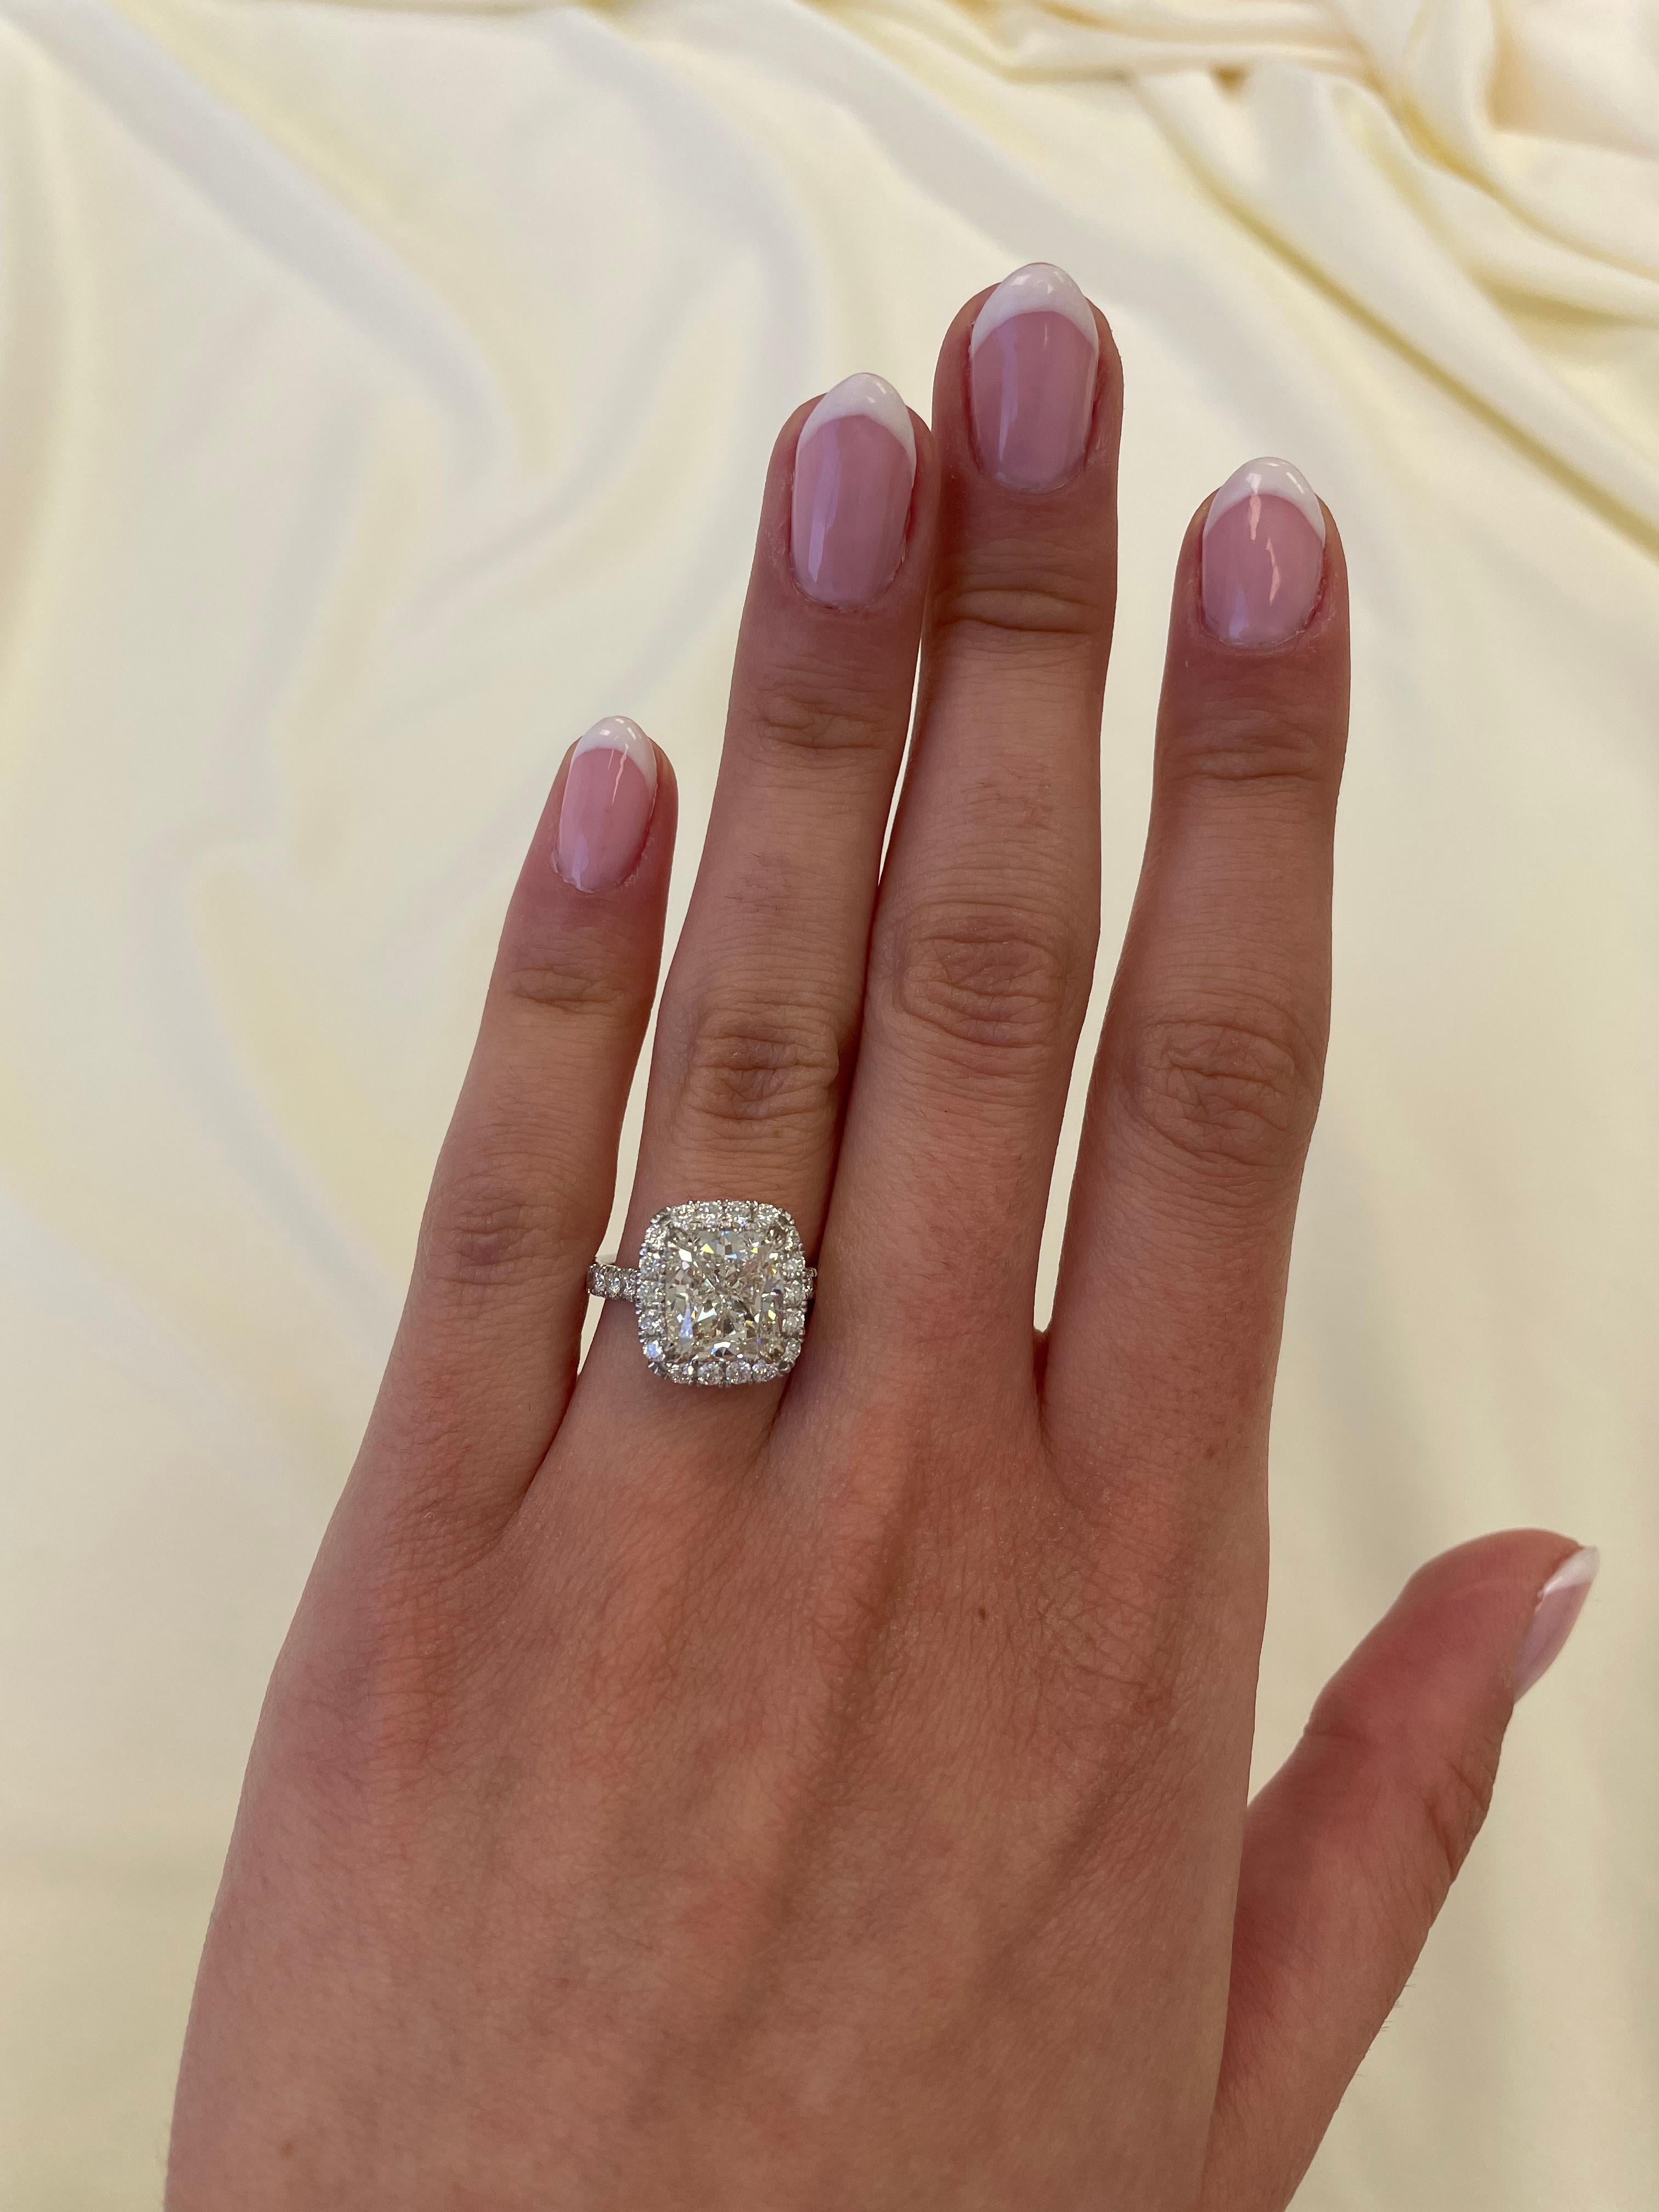 Classic stunning diamond engagement ring with diamond halo, EGL certified. By Alexander Beverly Hills.
4.47 carats total diamond weight.
4.01 carat cushion diamond, EGL certified H color grade and VS1 clarity grade. Complimented by 0.46 carats of